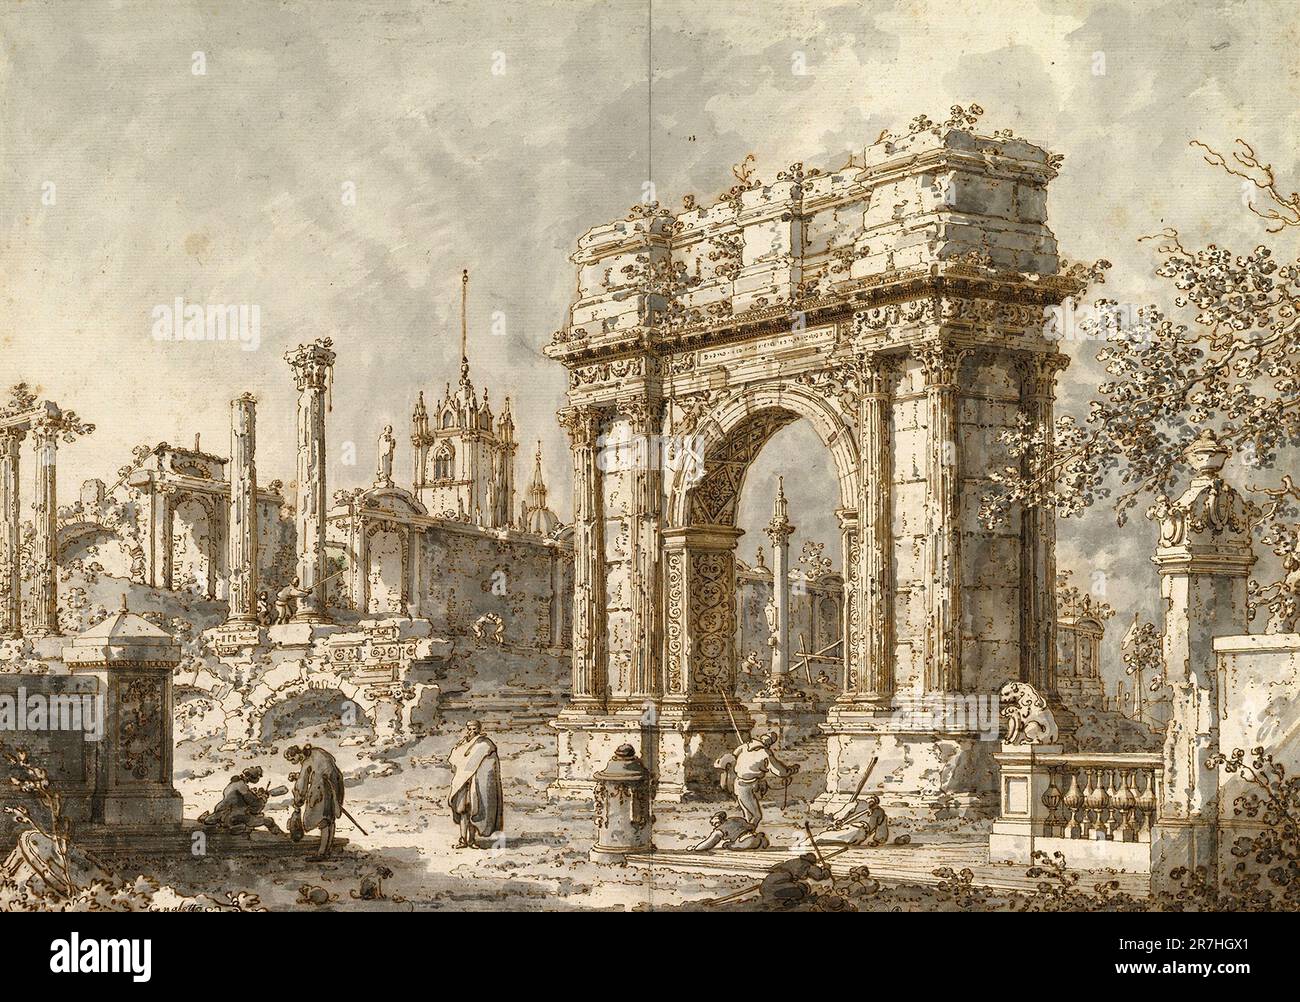 Capriccio with a Roman Triumphal Arch  painted by the Venetian painter Giovanni Antonio Canal, commonly known as Canaletto.Canaletto specialised in realsitic city scenes (called Verduti) but occasionally he painted from his imagination, which he called Capriccio Stock Photo